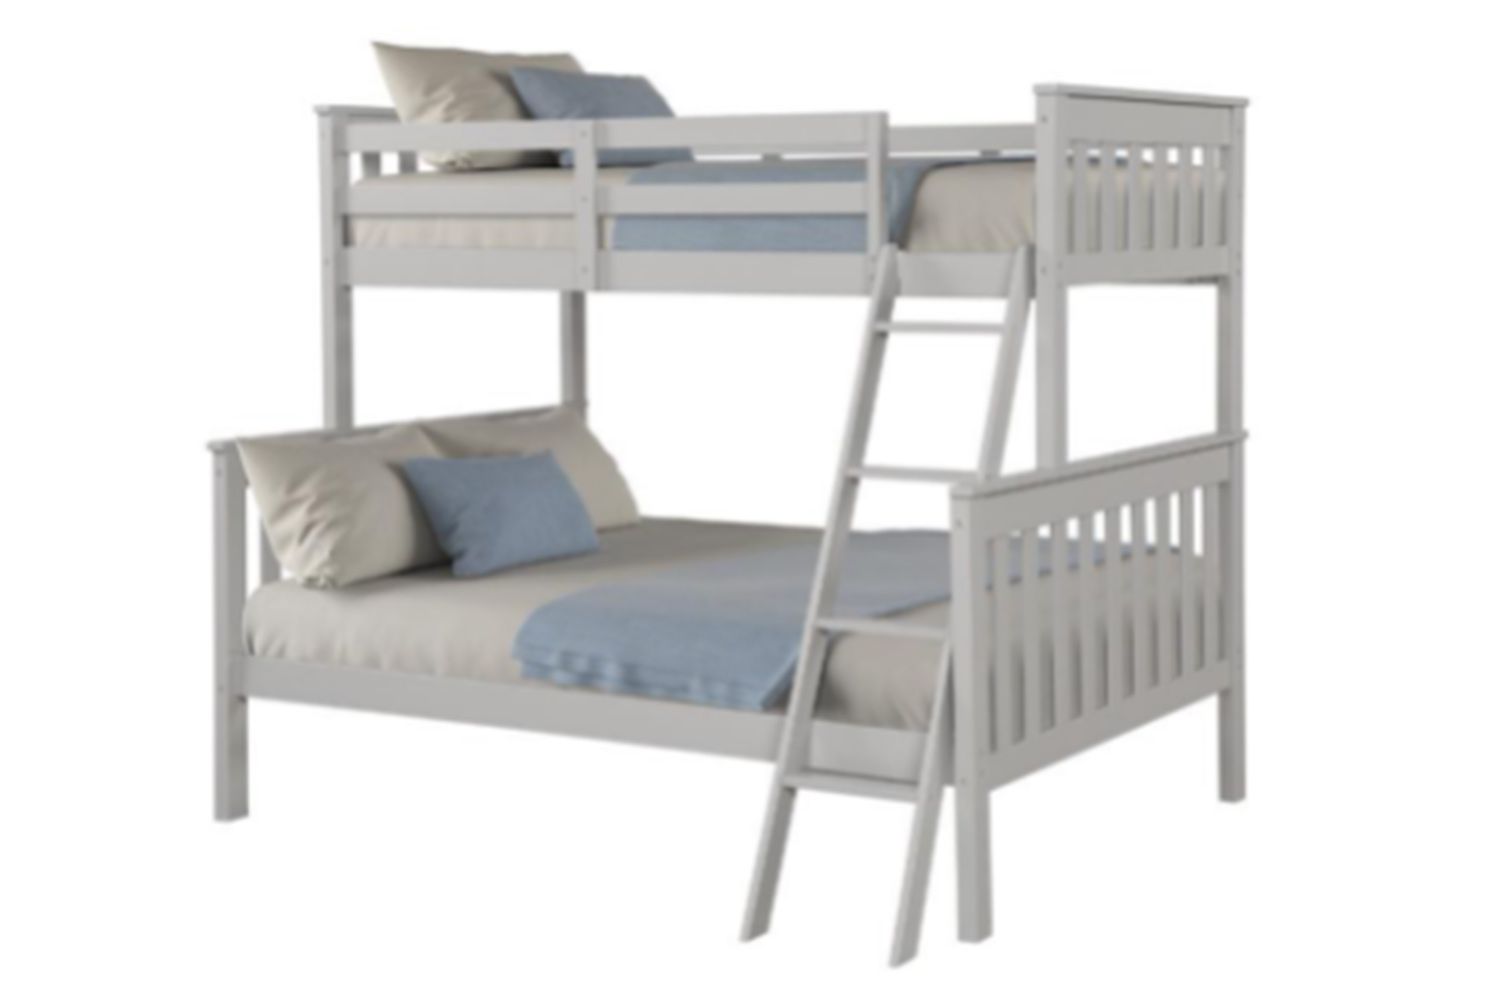 Bunk Beds Recalled, Old Style Bunk Beds